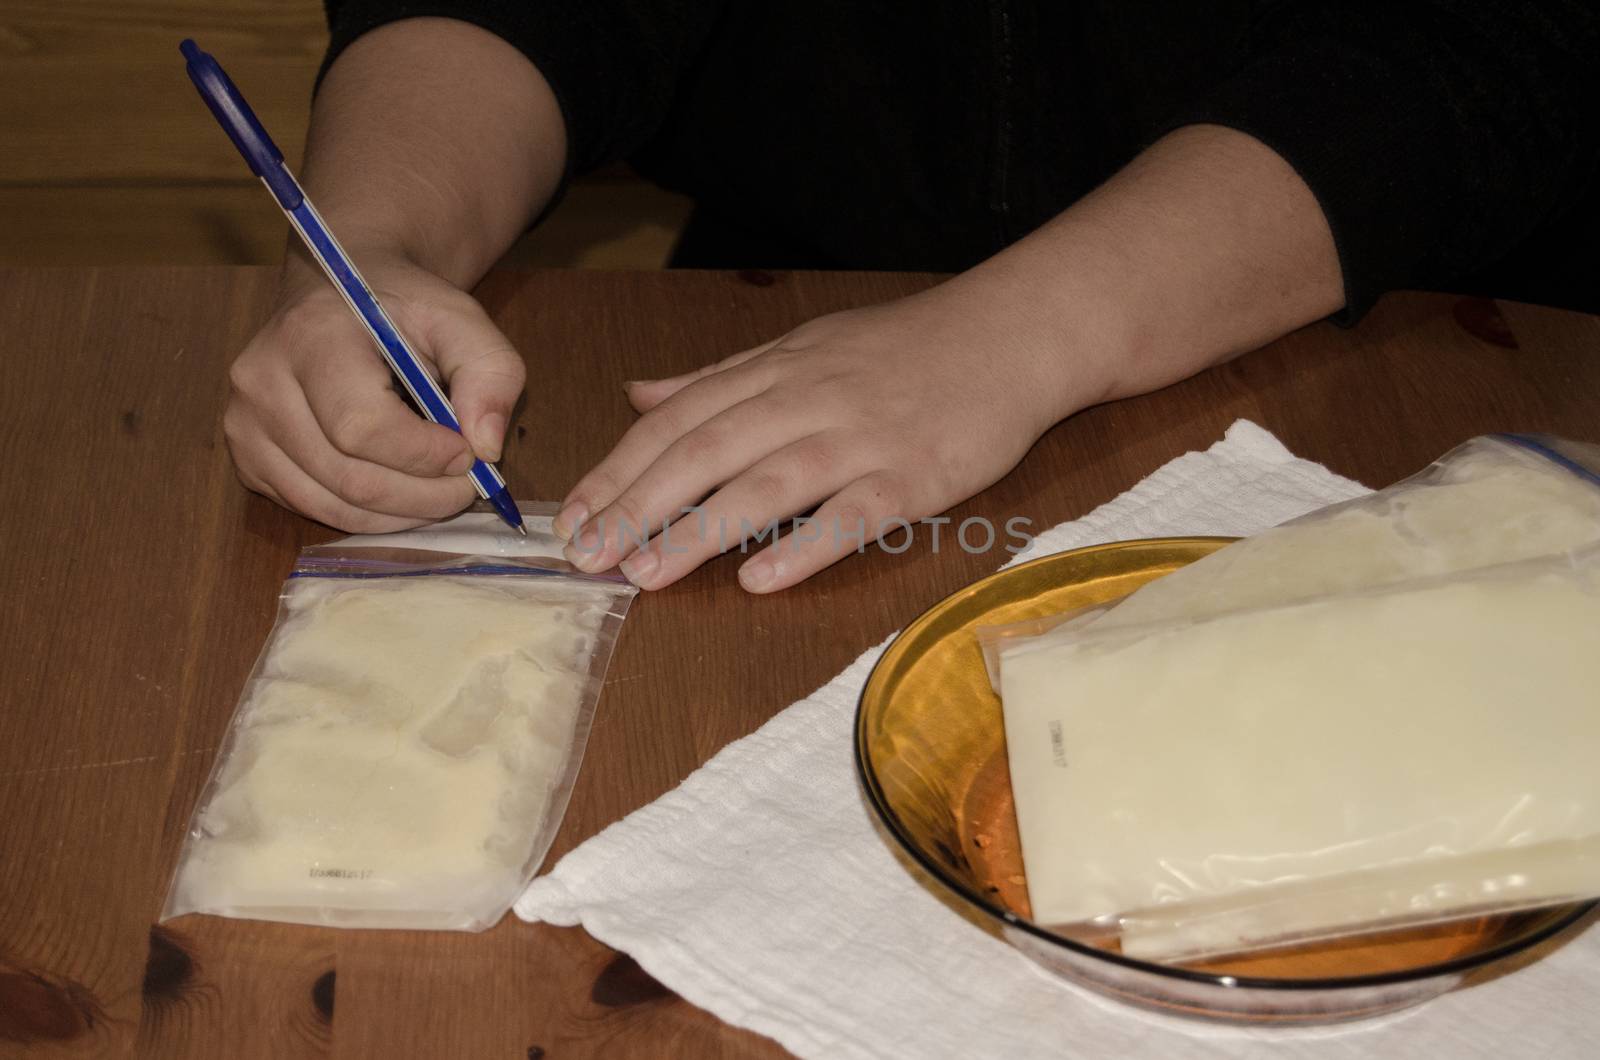 mother packing frozen breast milk in bag for further storage in freezer writing a date when milk was expresed, hands only and wooden table